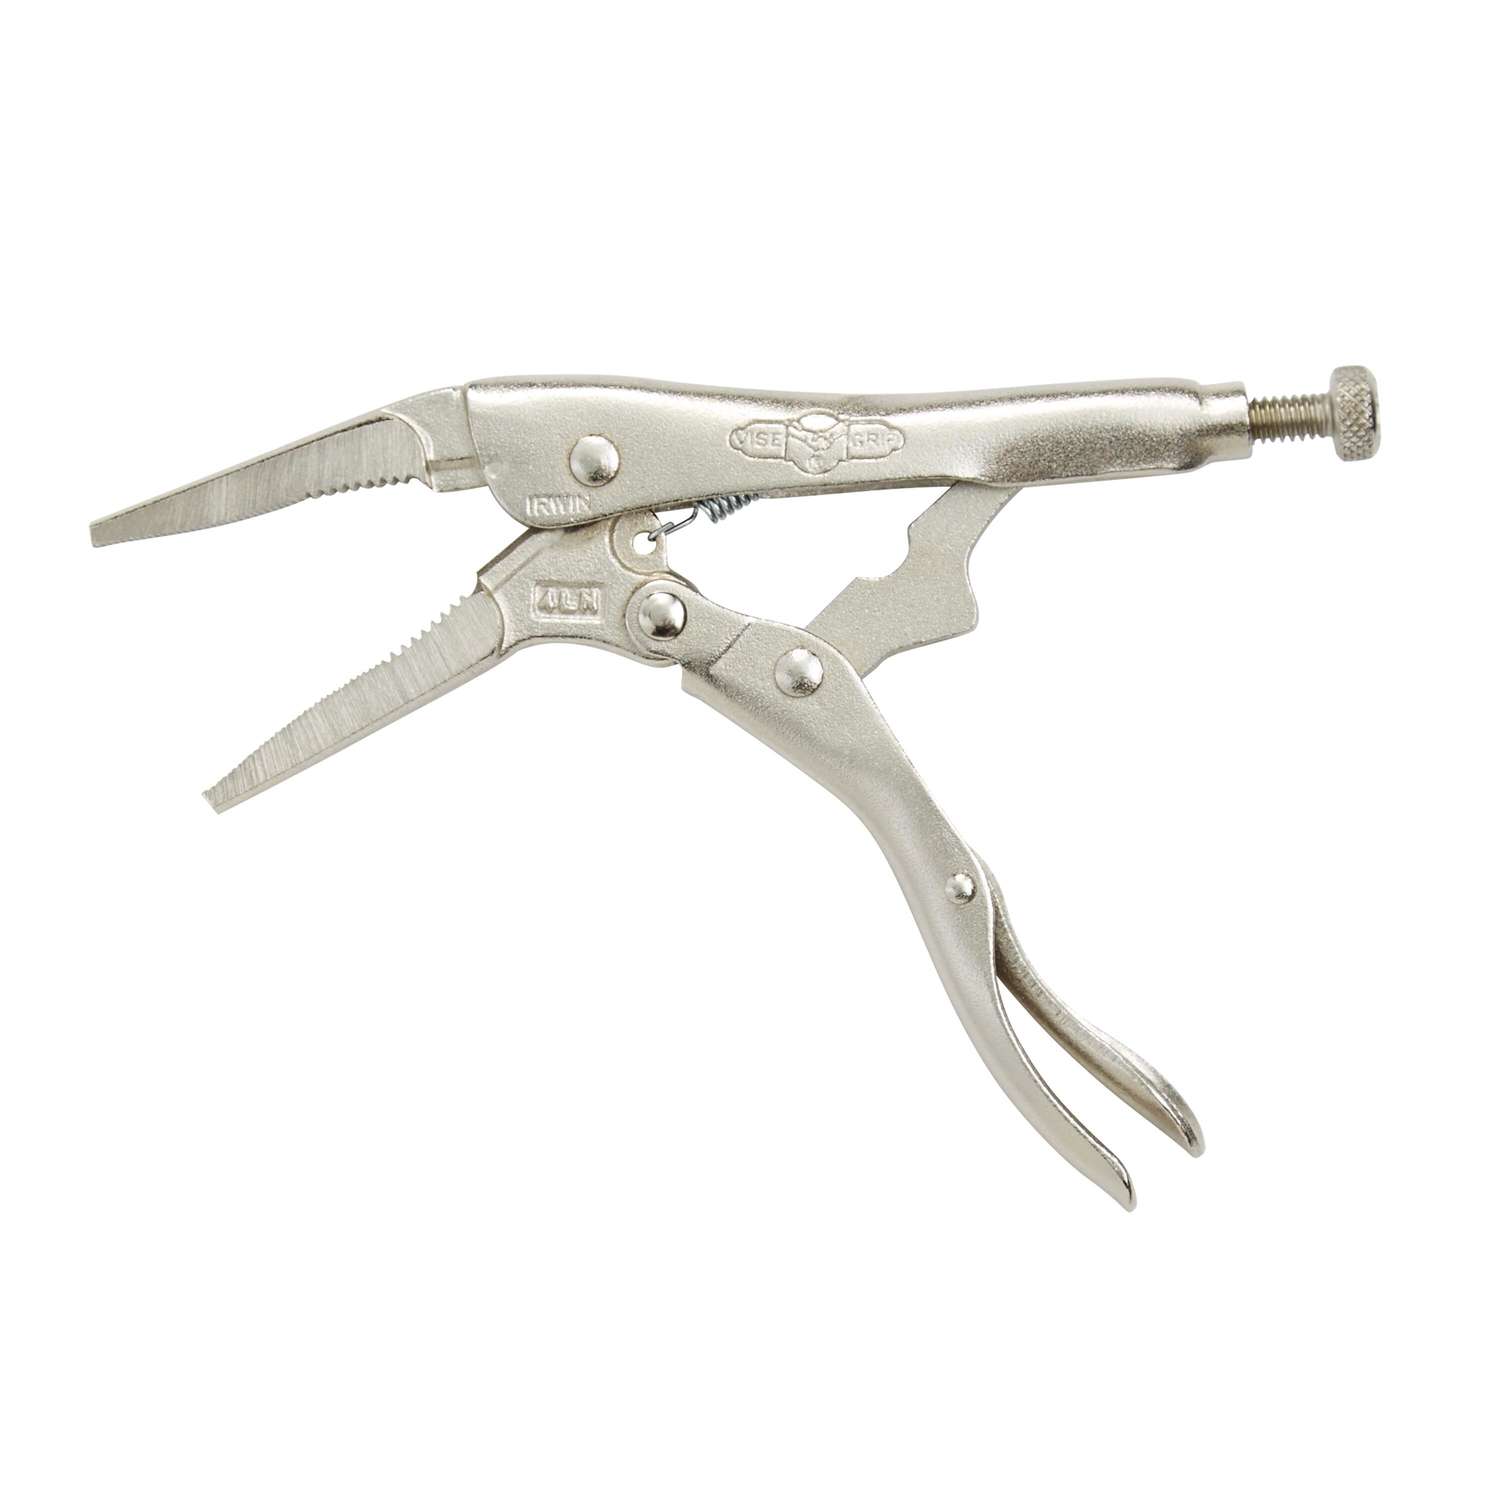 vise grip needle nose locking pliers from